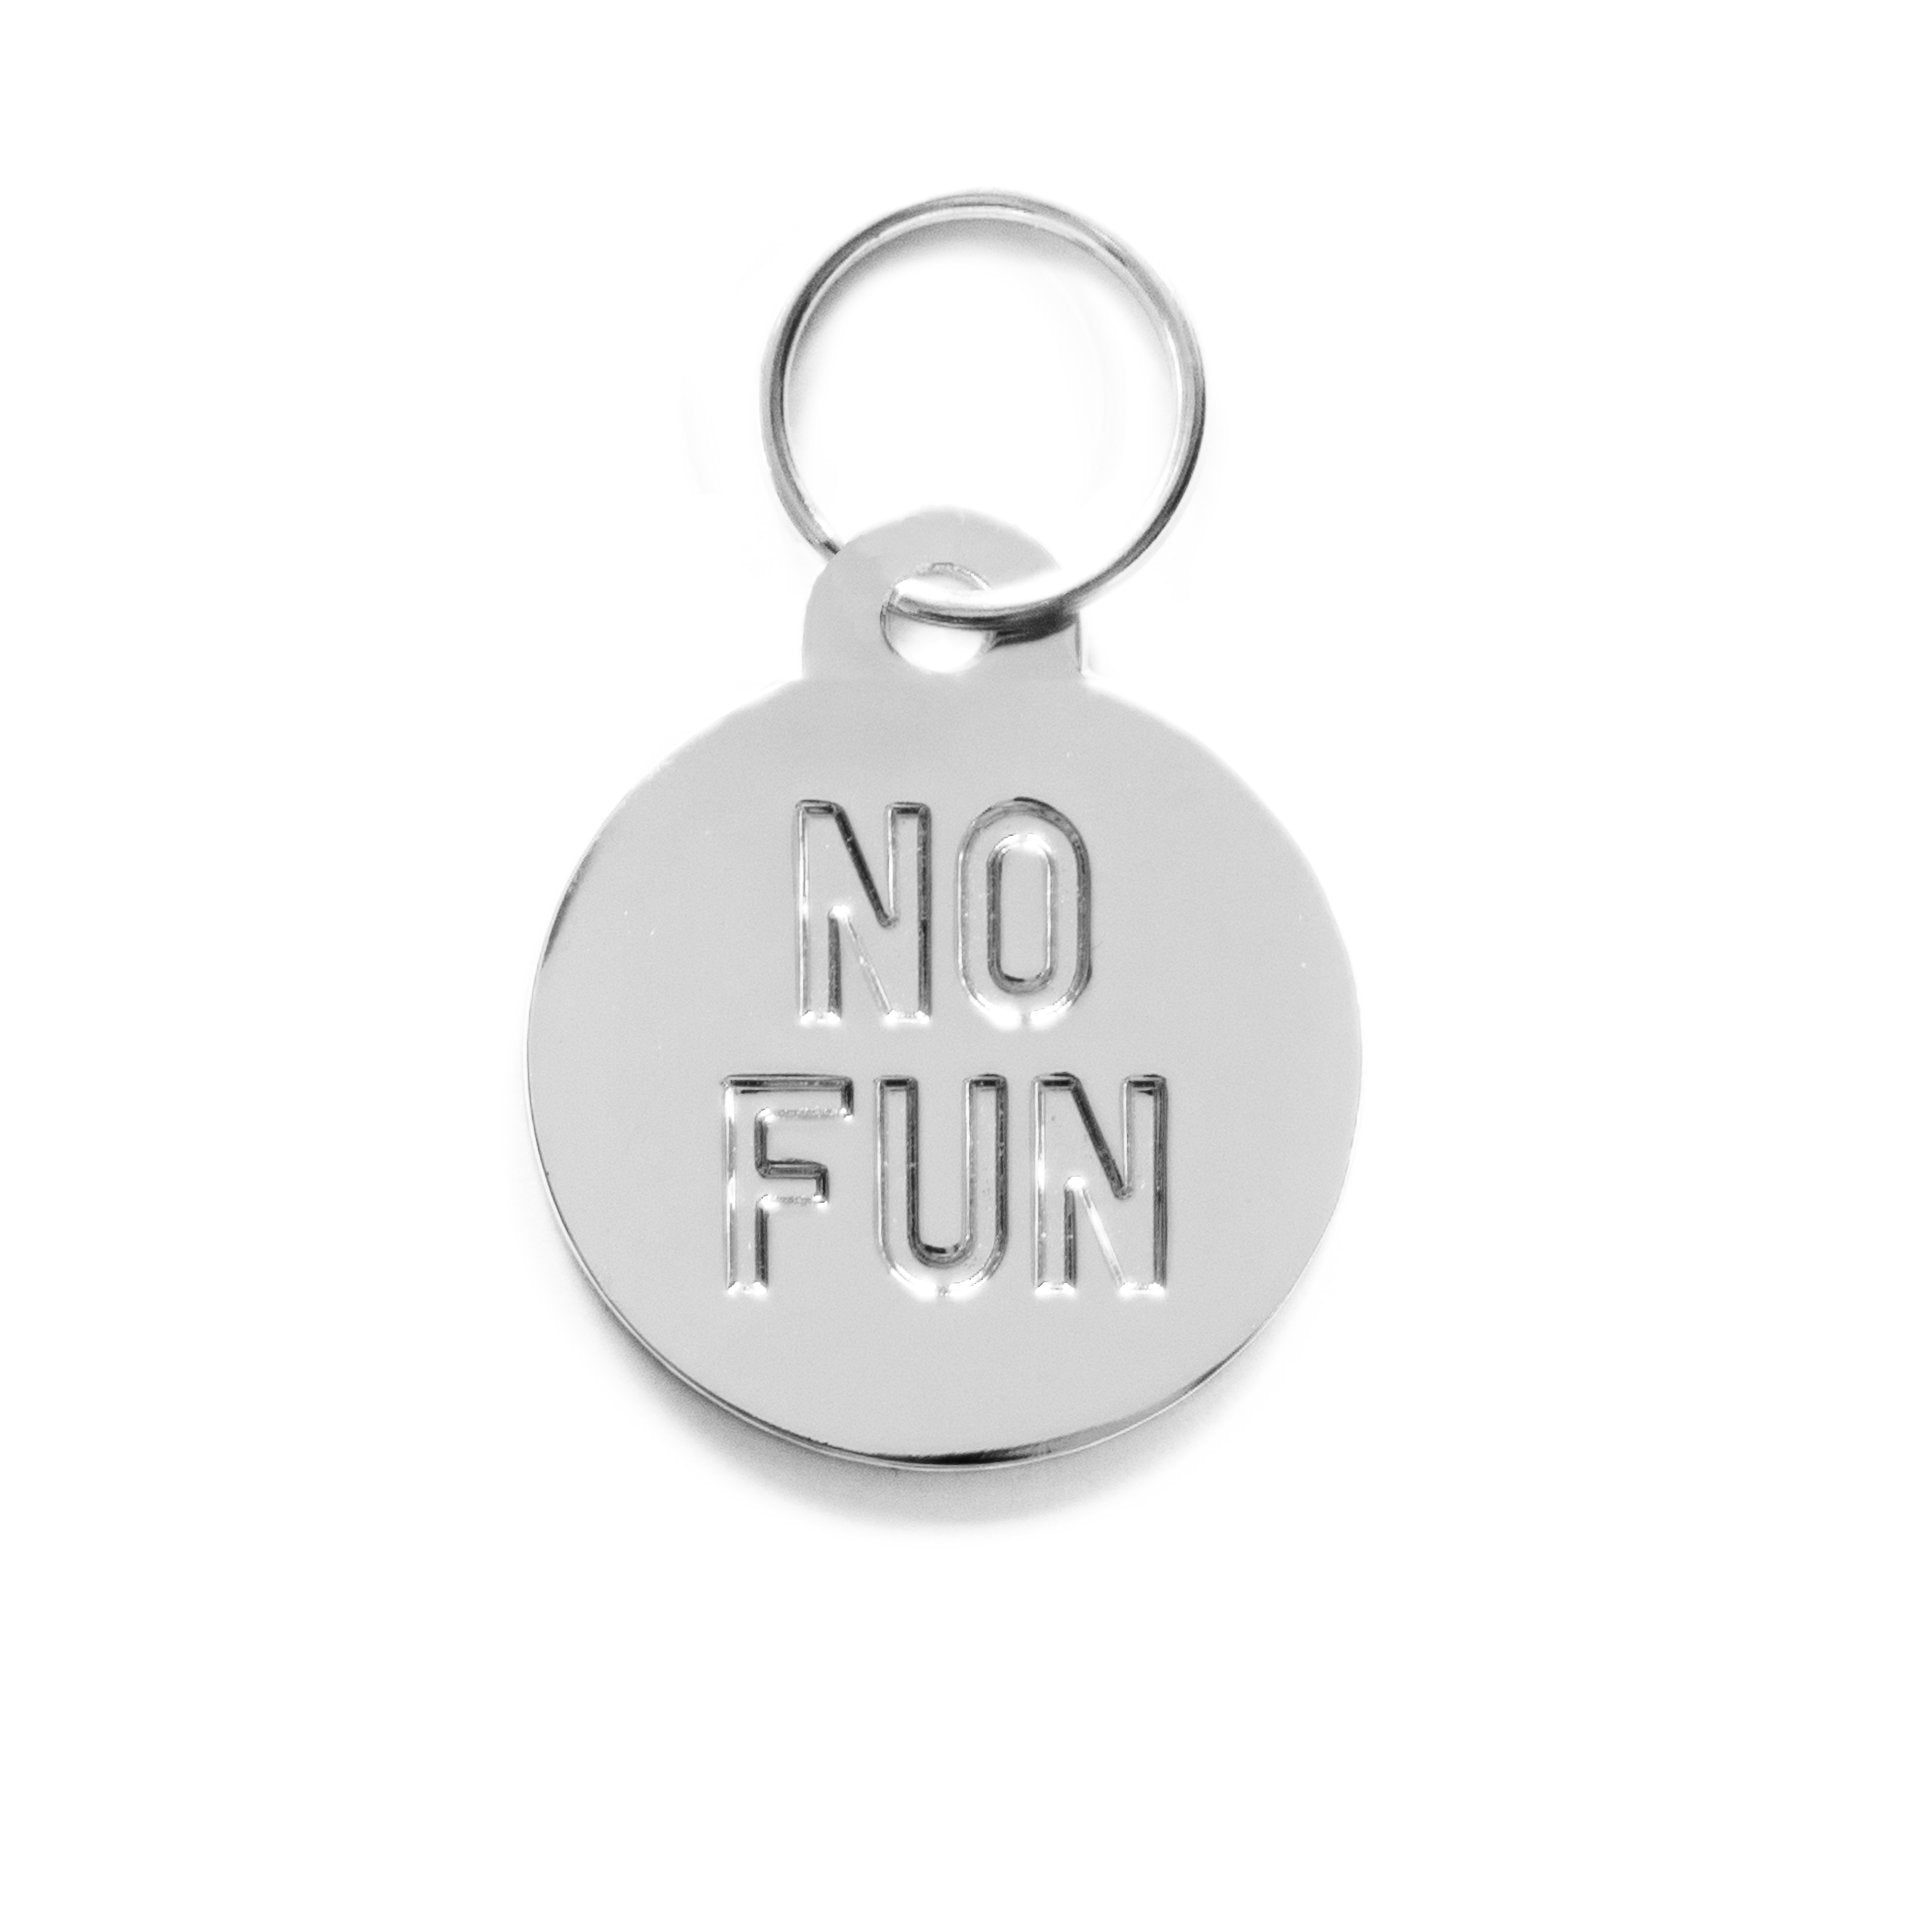 "No Fun®" circular Pet Tag Keyring in silver. 1.25" diameter molded metal keyring. Item is photographed against a white background to showcase the silver coloring.